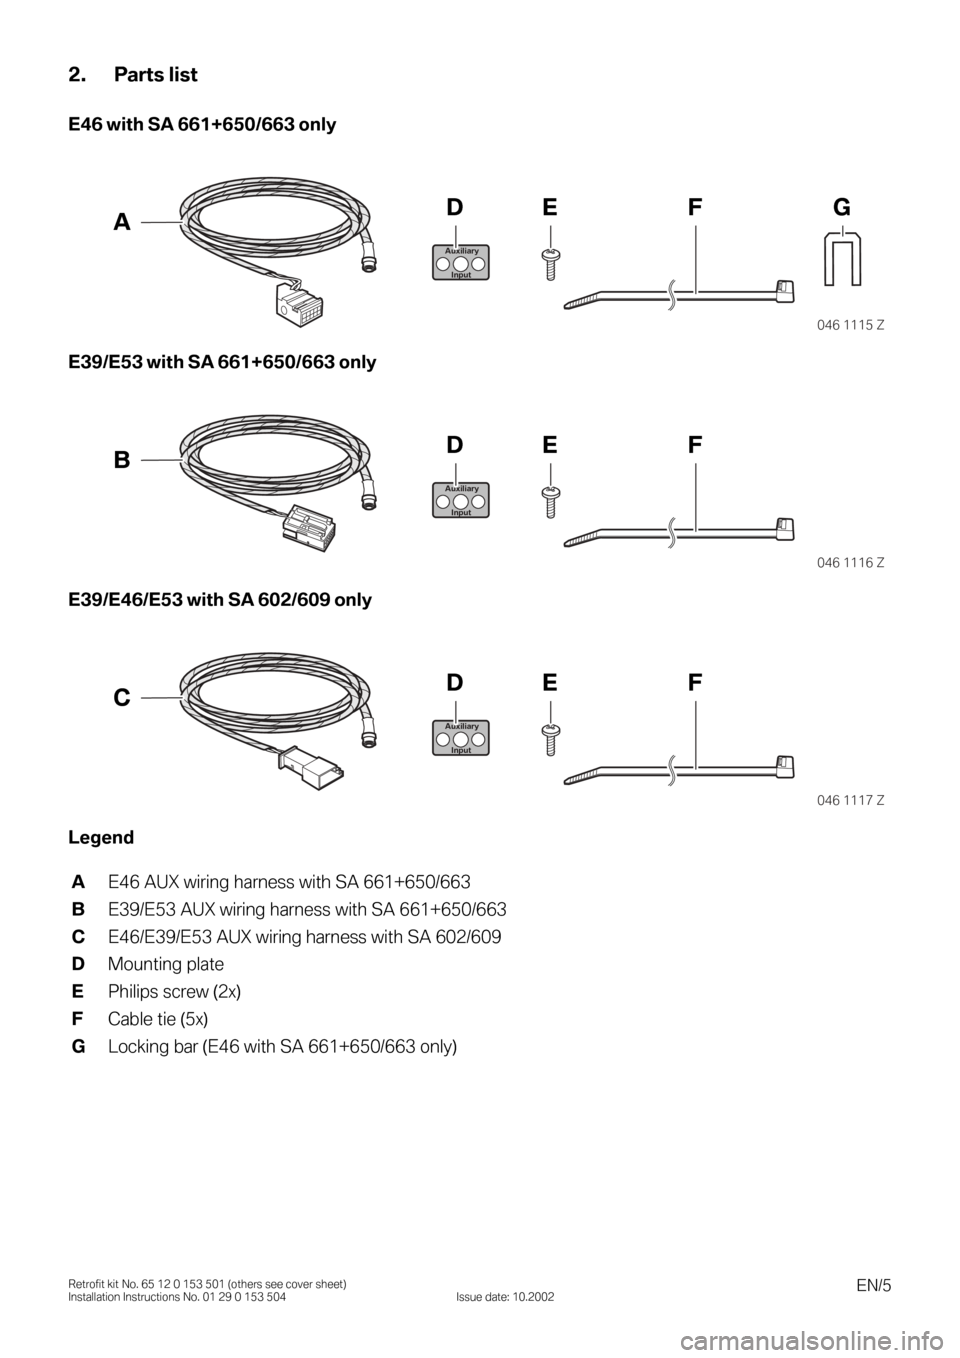 BMW 3 SERIES 2004 E46 Auxilliary Connector Installation Instruction Manual EN/5Retrofit kit No. 65 12 0 153 501 (others see cover sheet)
Installation Instructions No. 01 29 0 153 504 Issue date: 10.2002
2. Parts list
E46 with SA 661+650/663 only
0
E39/E53 with SA 661+650/663